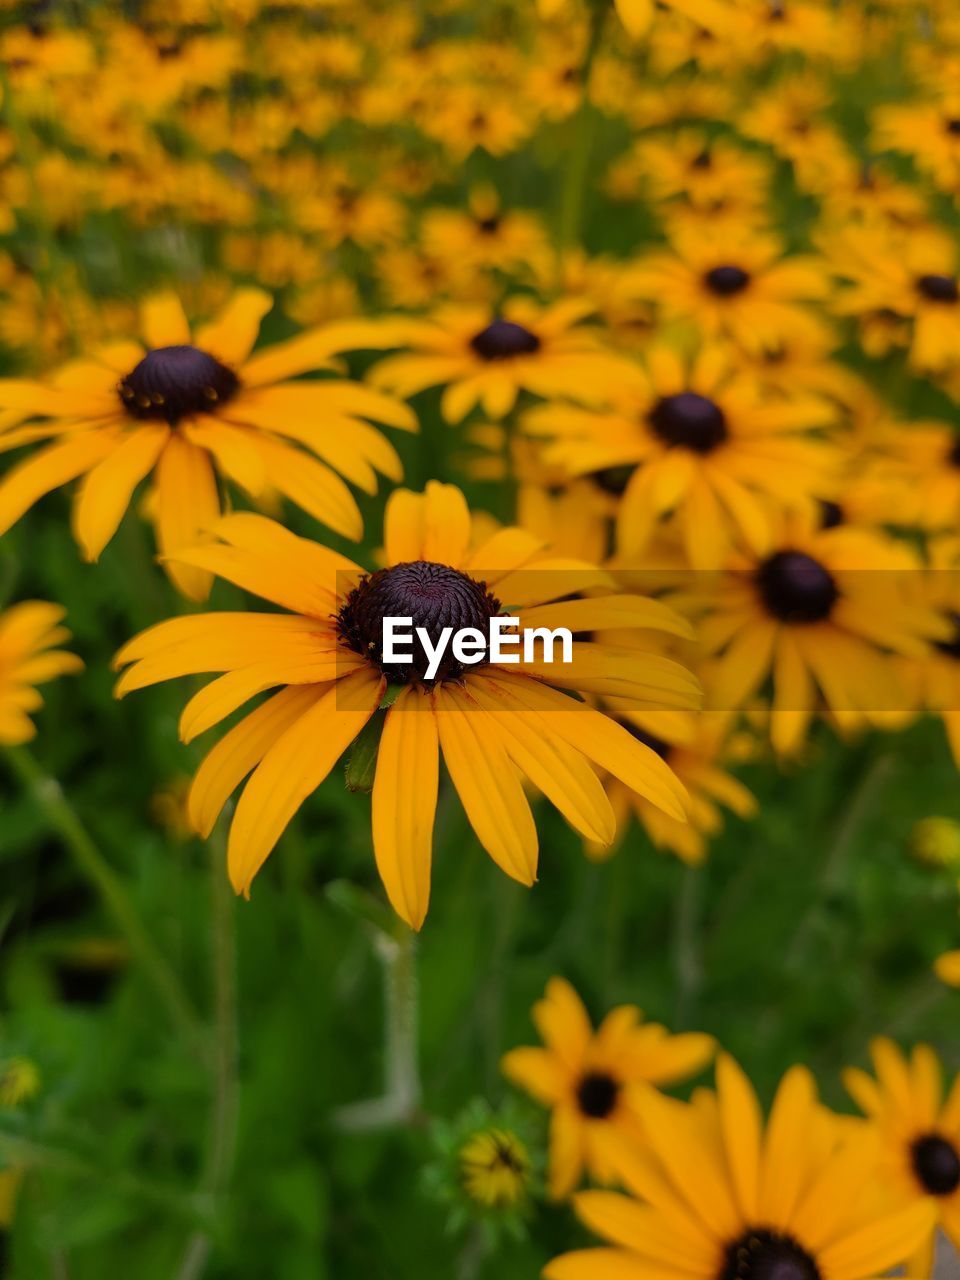 flower, flowering plant, plant, freshness, beauty in nature, yellow, flower head, growth, fragility, black-eyed susan, petal, close-up, nature, field, inflorescence, meadow, no people, focus on foreground, pollen, macro photography, day, outdoors, wildflower, prairie, selective focus, botany